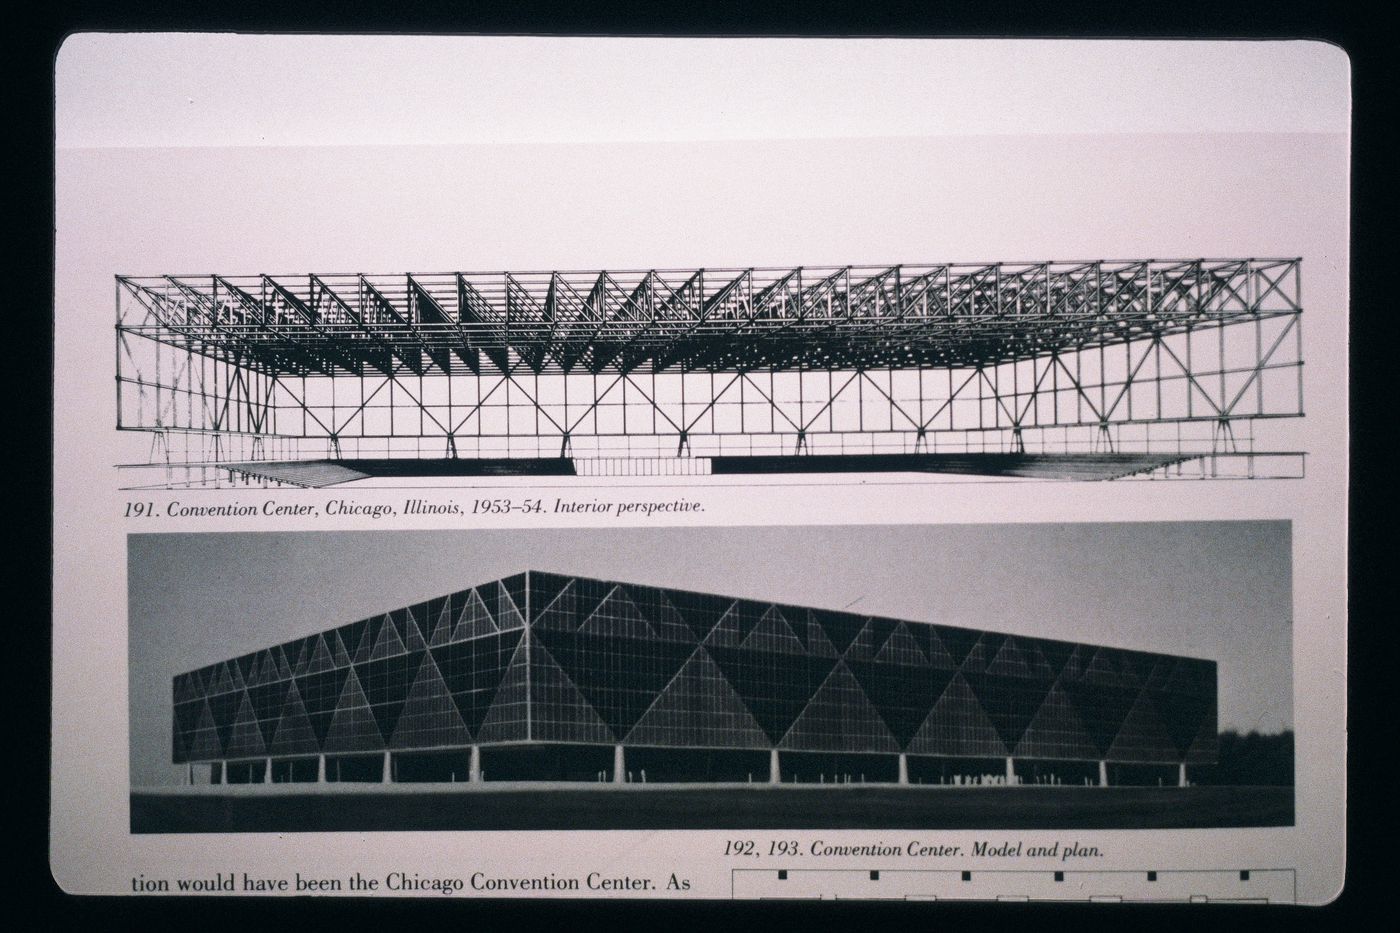 Slide of a drawing for Chicago Convention Center, Chicago, by Mies van der Rohe